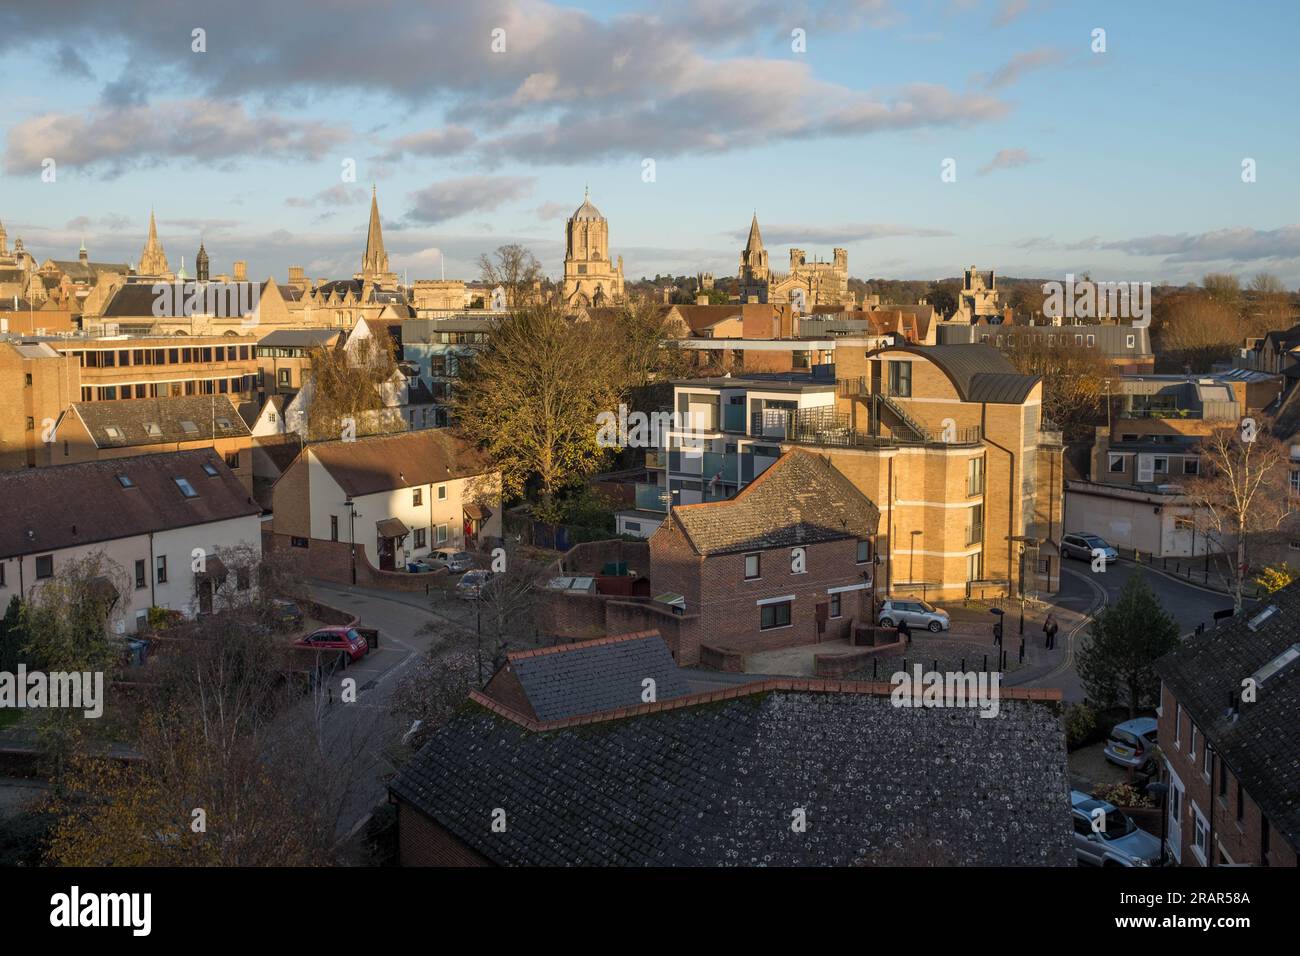 View of some of Oxfords Spires, with Tim Tower (Christ Church) centre, Christ Church Cathedral on the right, to the left is the spire of St. Aldgate's Church, on the far left the spire of University Church of St. Mary the Virgin Stock Photo